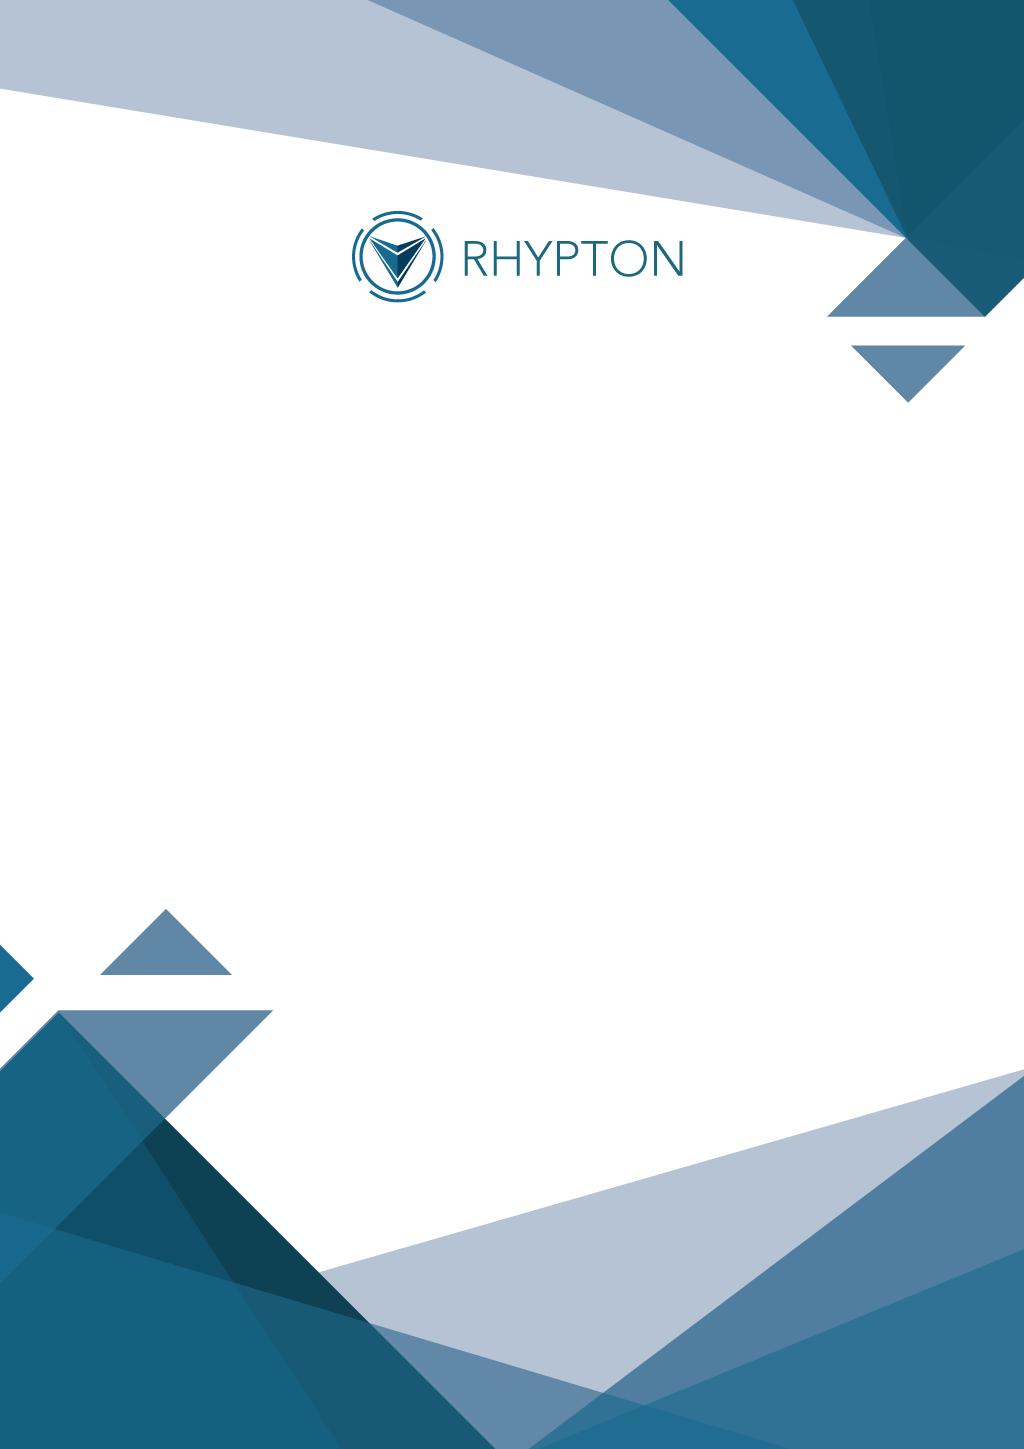 TABLE OF CONTENTS 1.0 Overview Of Rhypton Coin 2.0 About Rhypton Token 3.0 Token Distribution 4.0 Revenue Distribution 5.0 Network of Participants 6.0 Advantages for Participants 6.